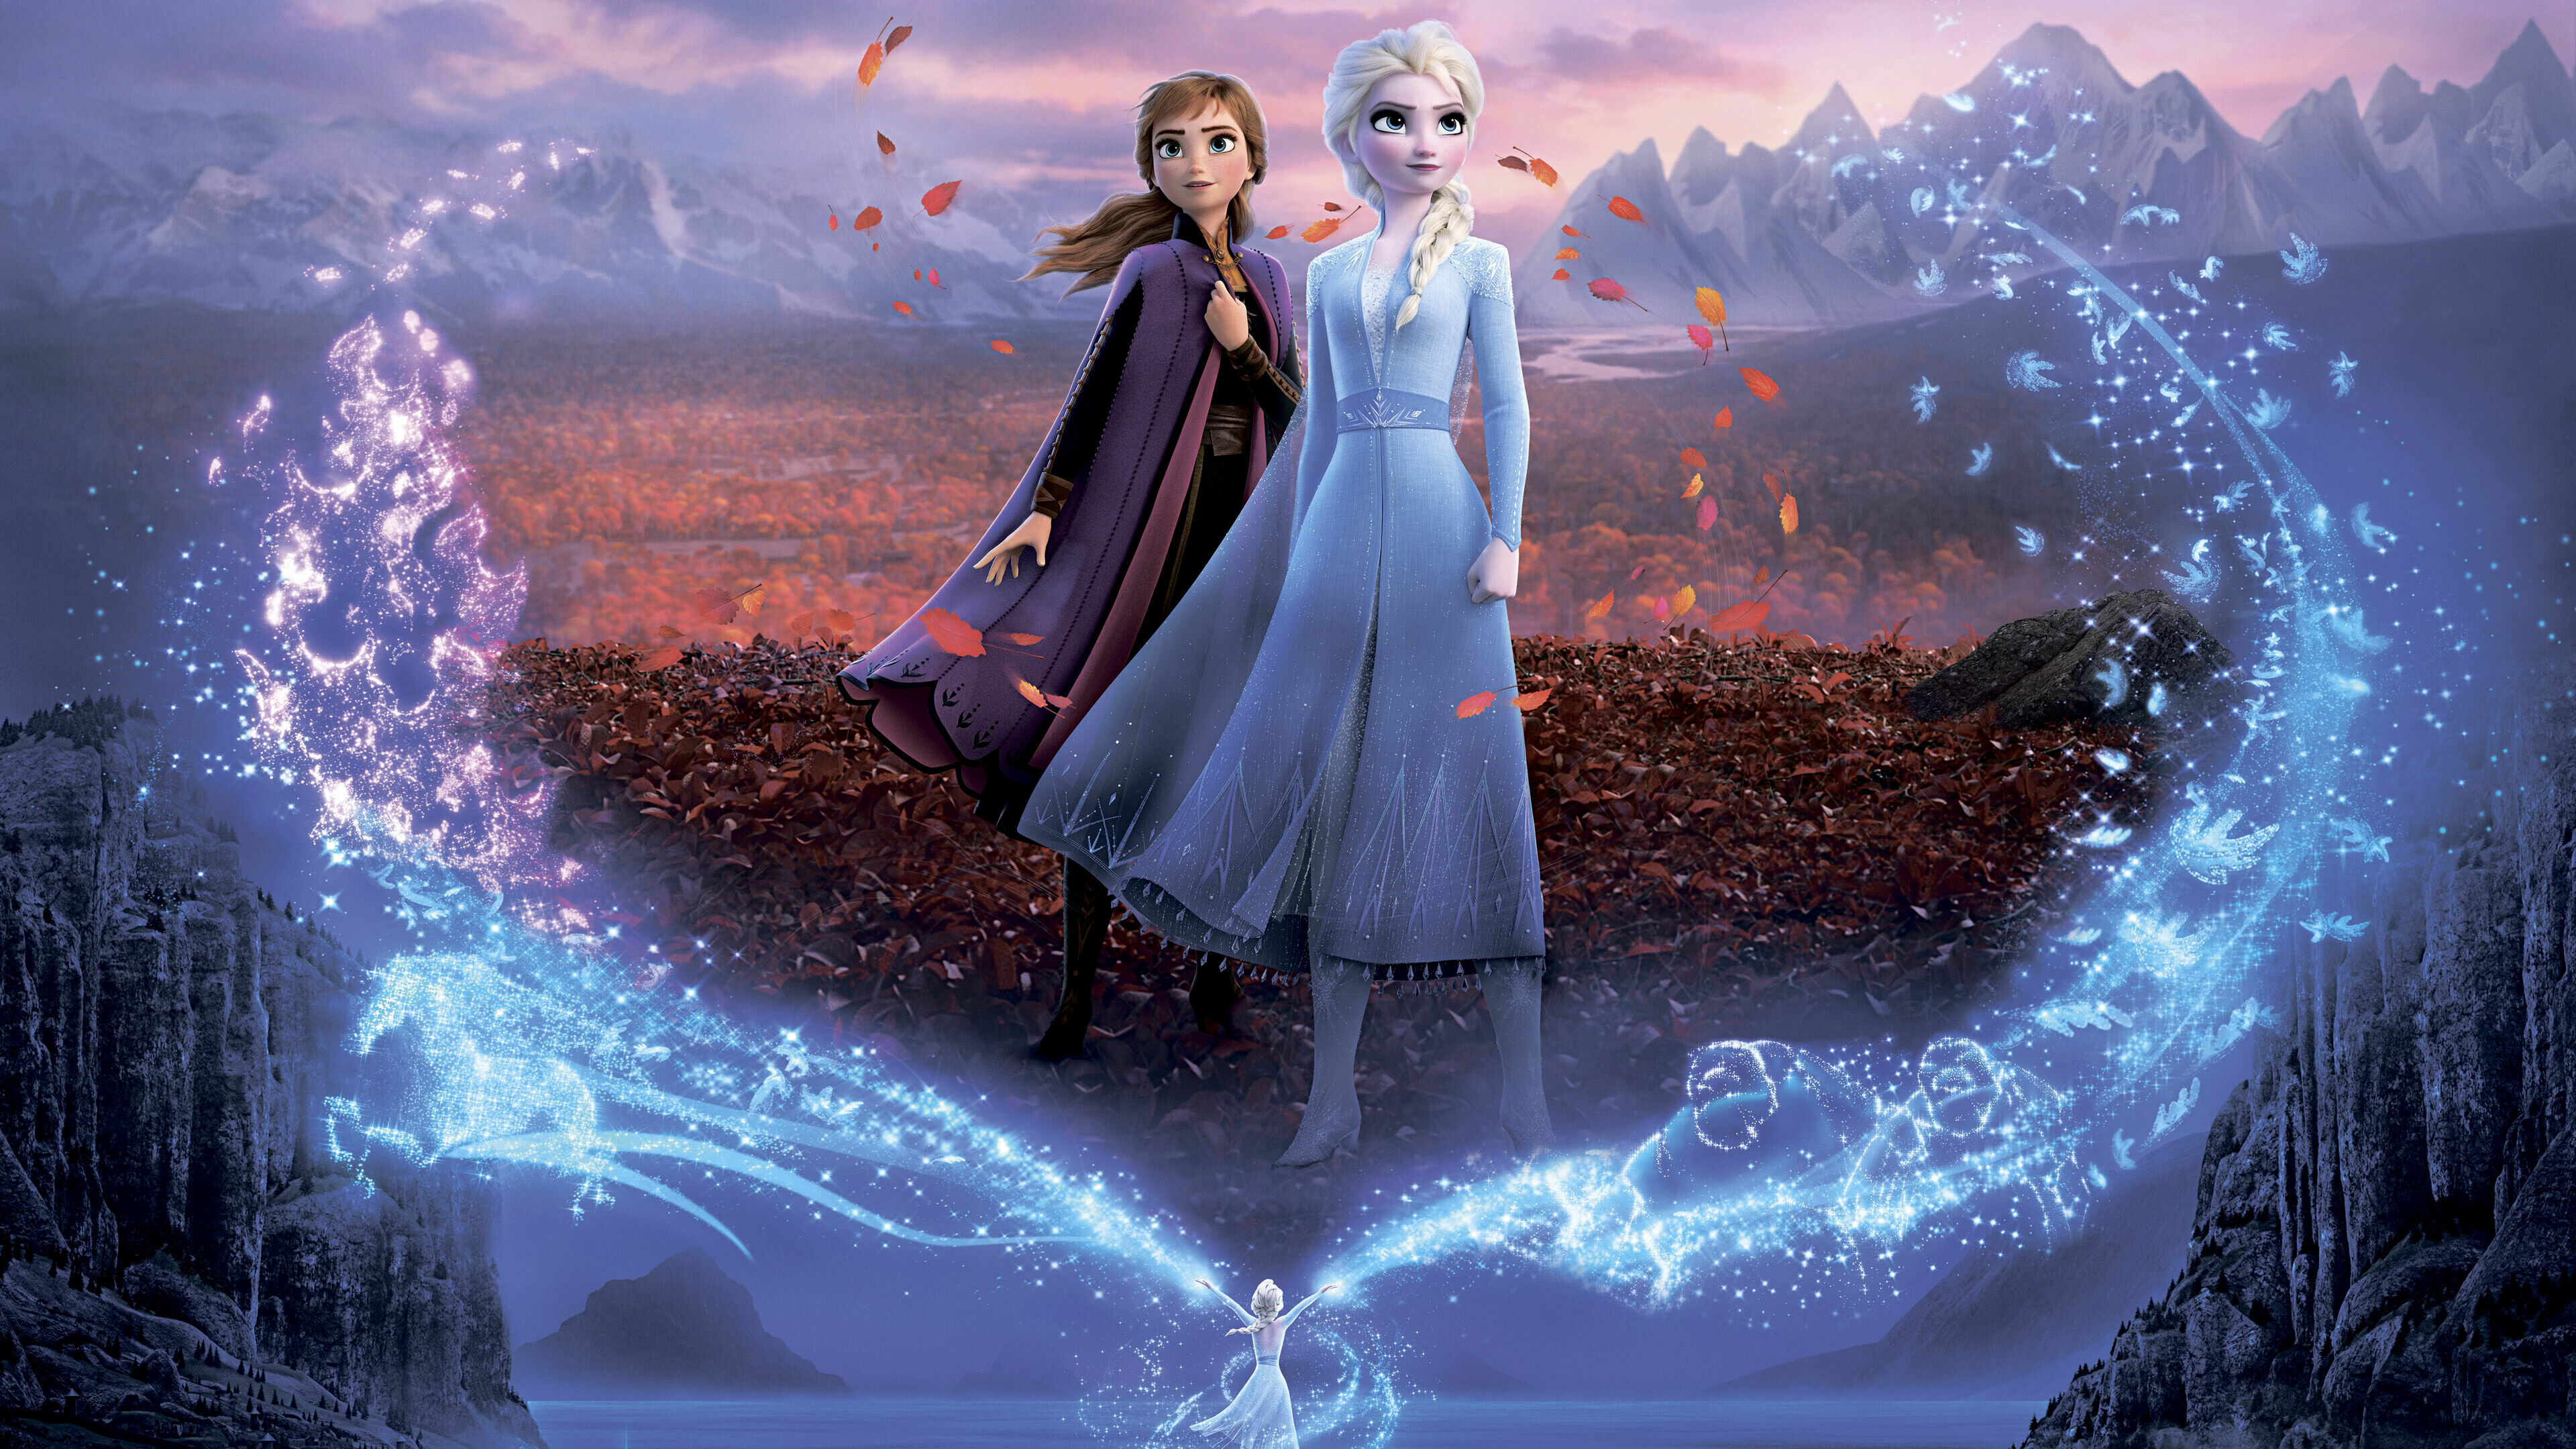 Frozen: Elsa And Anna Poster, Animation. 3840x2160 4K Background.